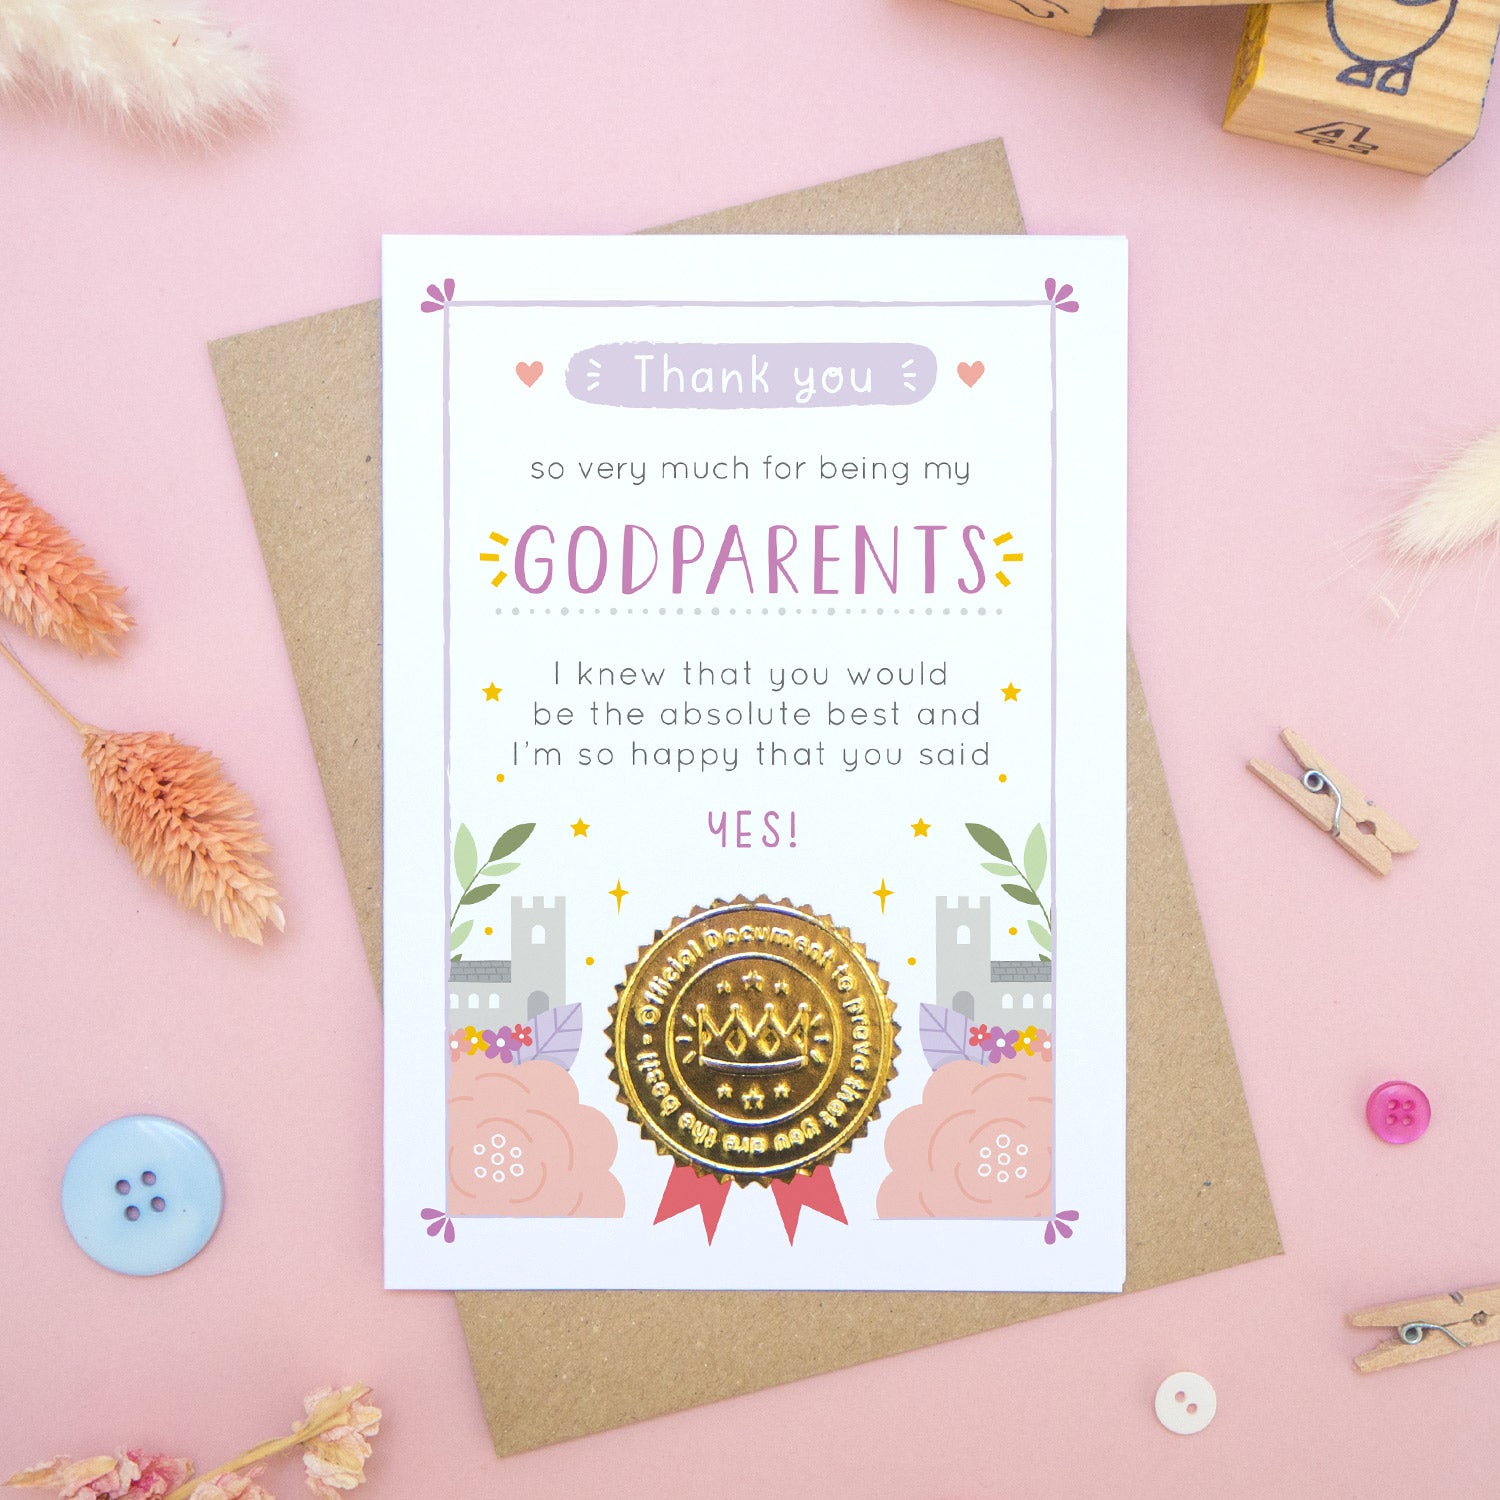 A ‘thank you for being my godparents’ certificate card with a shiny gold seal in the purple colour palette lying flatlay on top of a kraft brown envelope on a pink surface surrounded by building blocks, buttons and dry flowers.